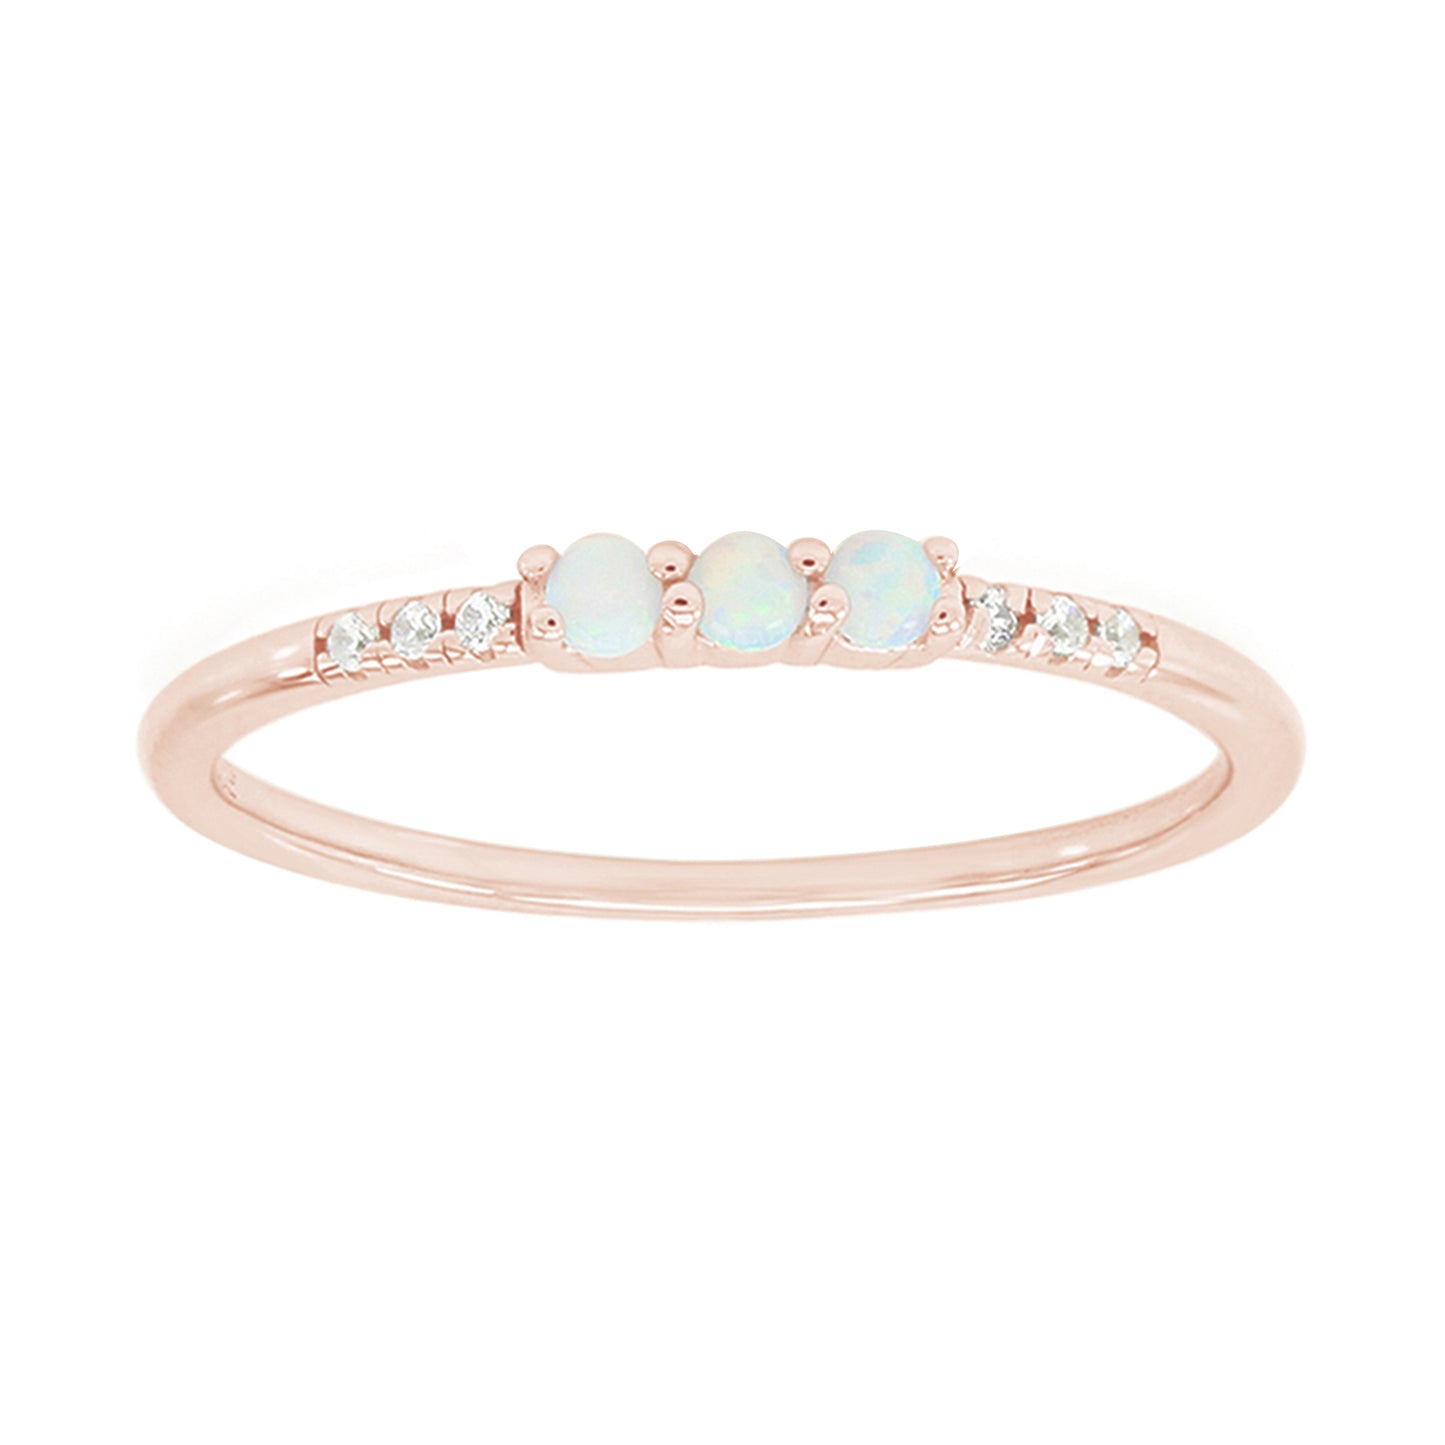 Dainty Stackable Opal Promise Ring Band in 14K Gold Over Sterling Silver Valentine's Day Jewelry Gift For Her